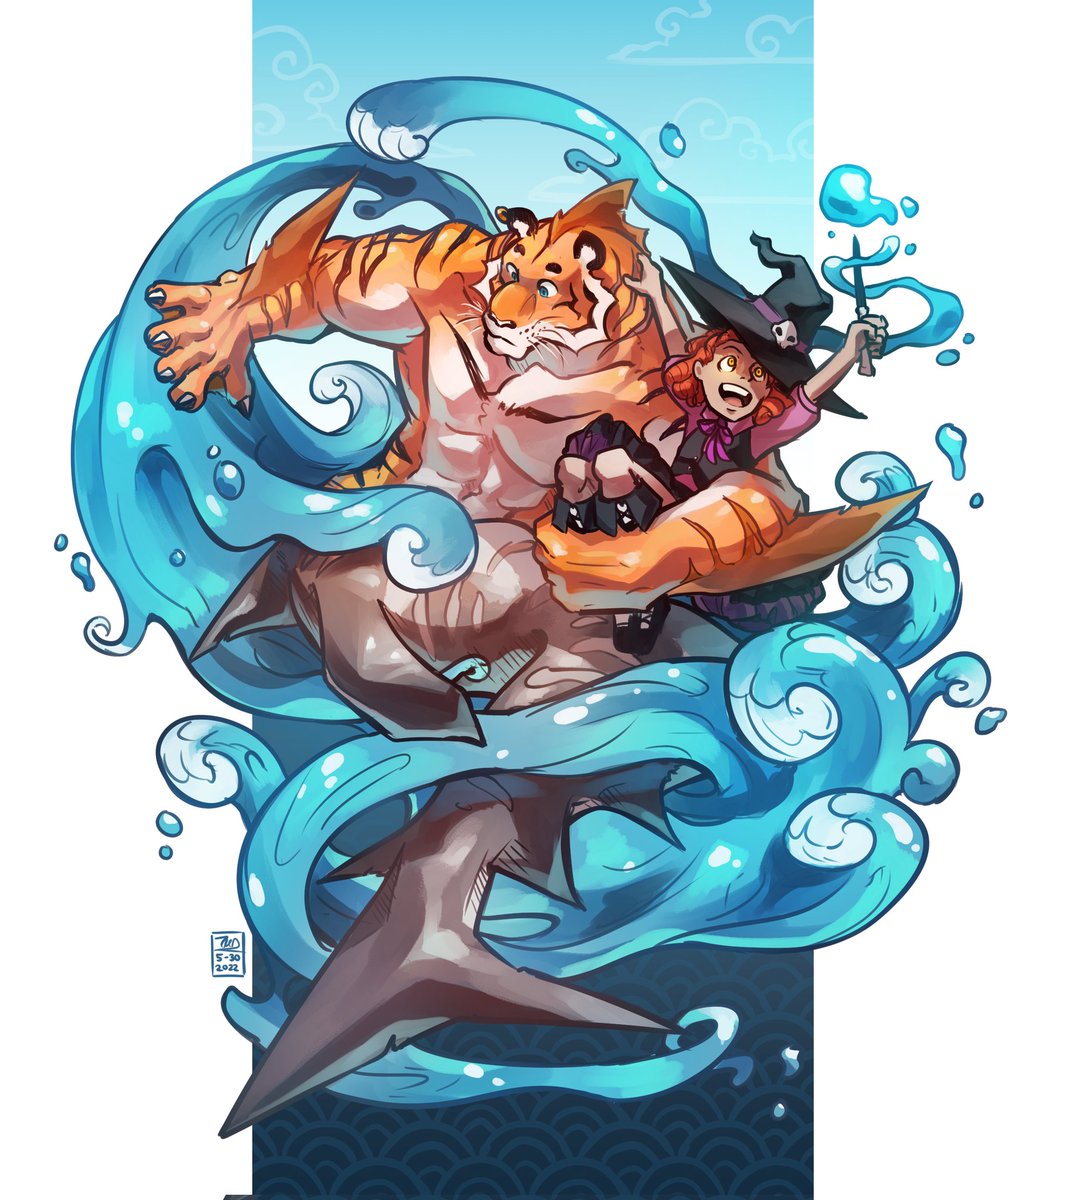 If my tabaxi turns into a mermaid I'm gonna FLIP ft. Clariese, an NPC in the campaign #dndart #mermay2022 #characterdesign 
🌊🐯